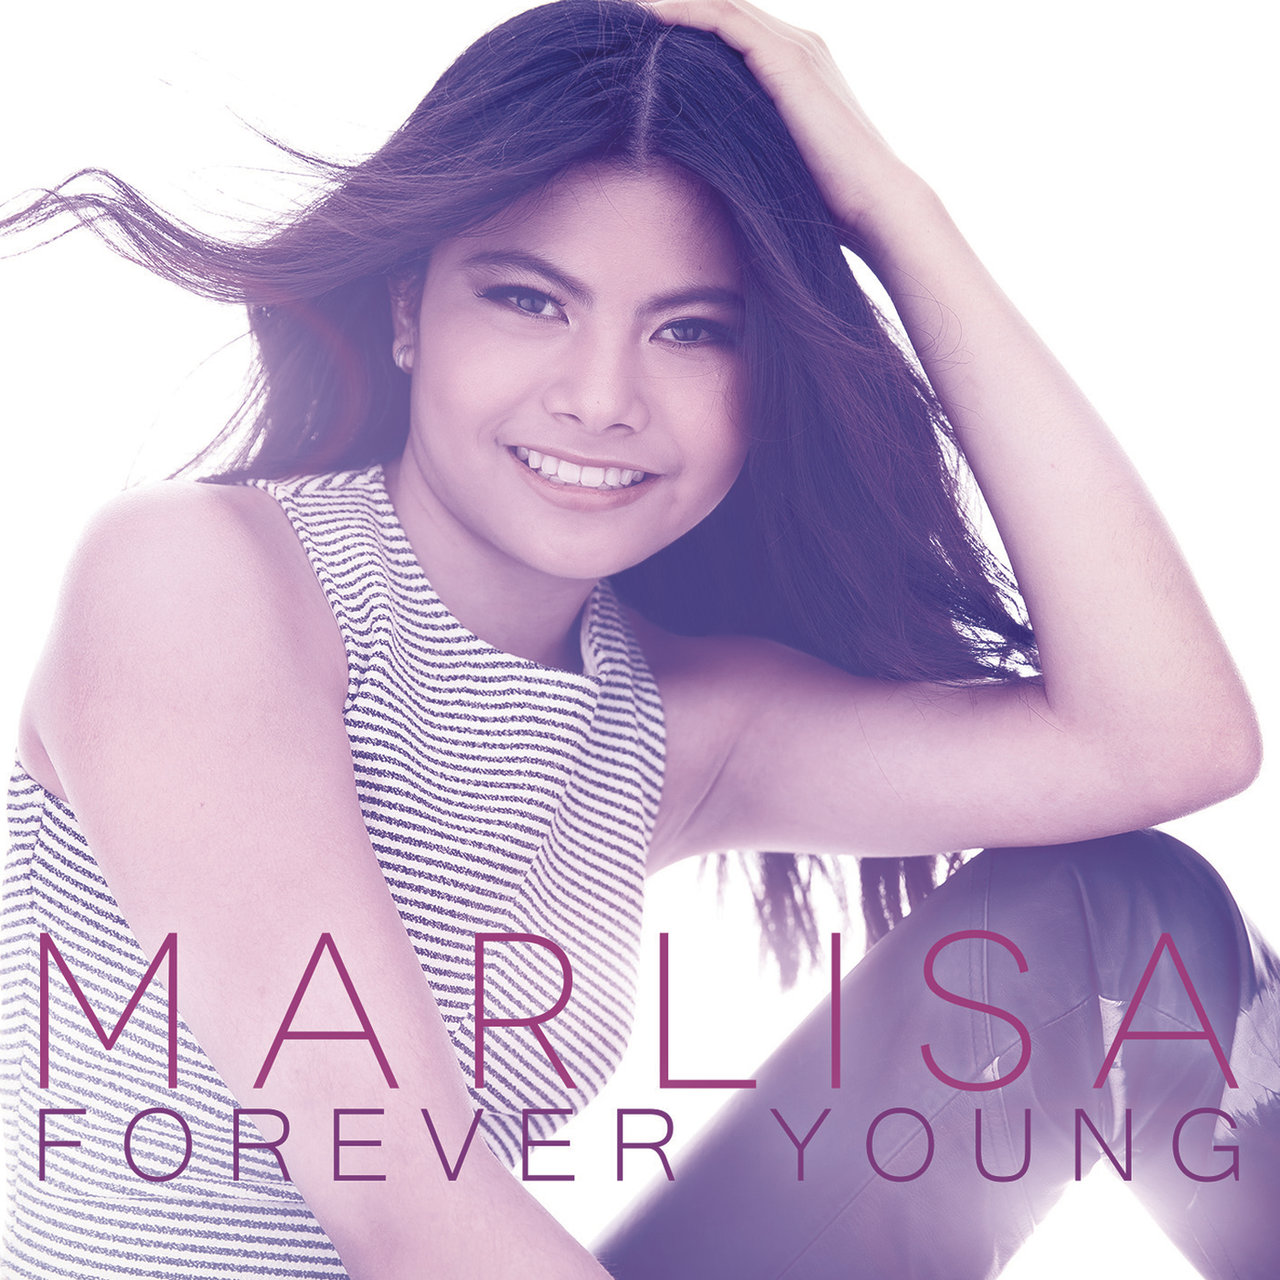 Marlisa Forever Young cover artwork